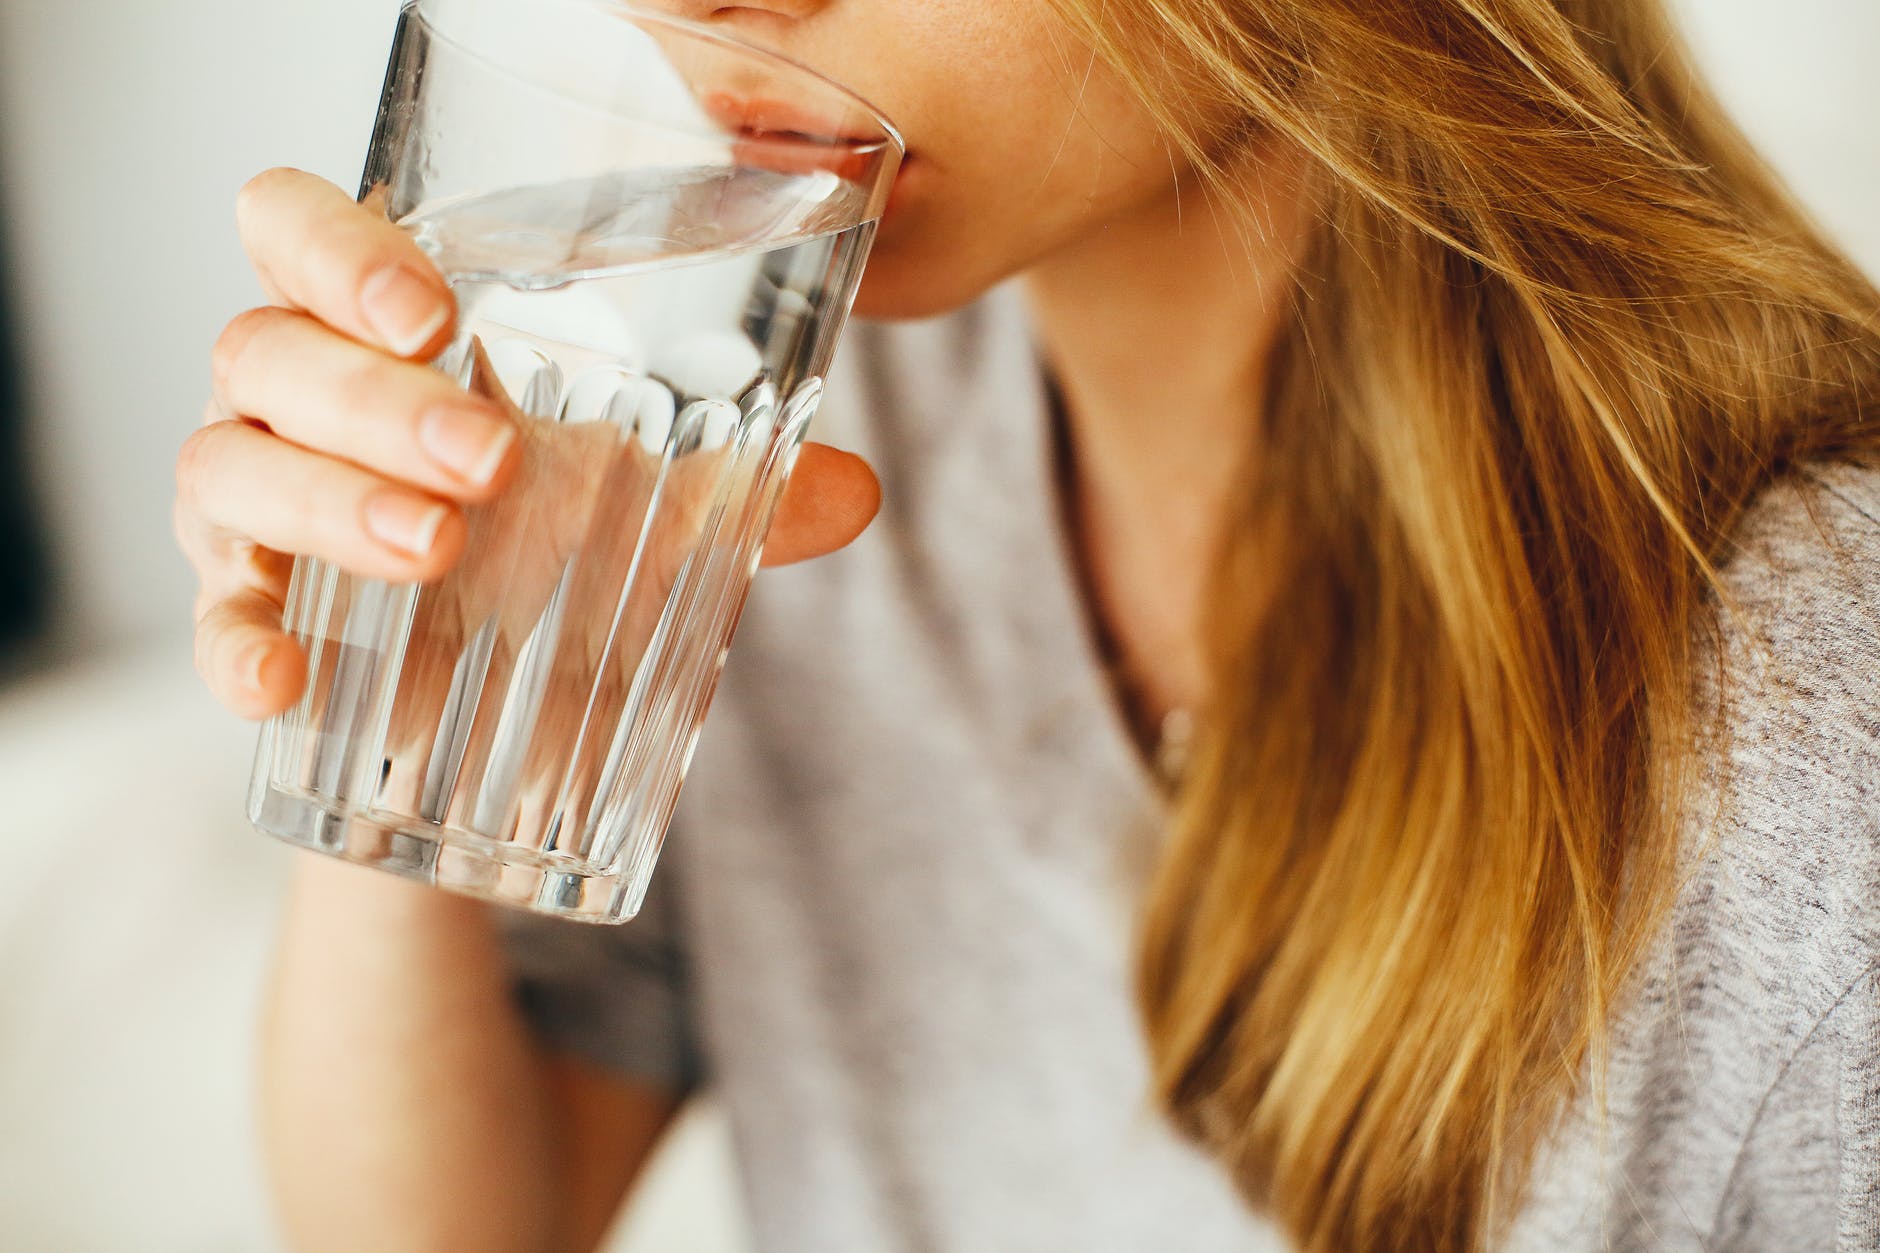 Is it possible to drink too much water?